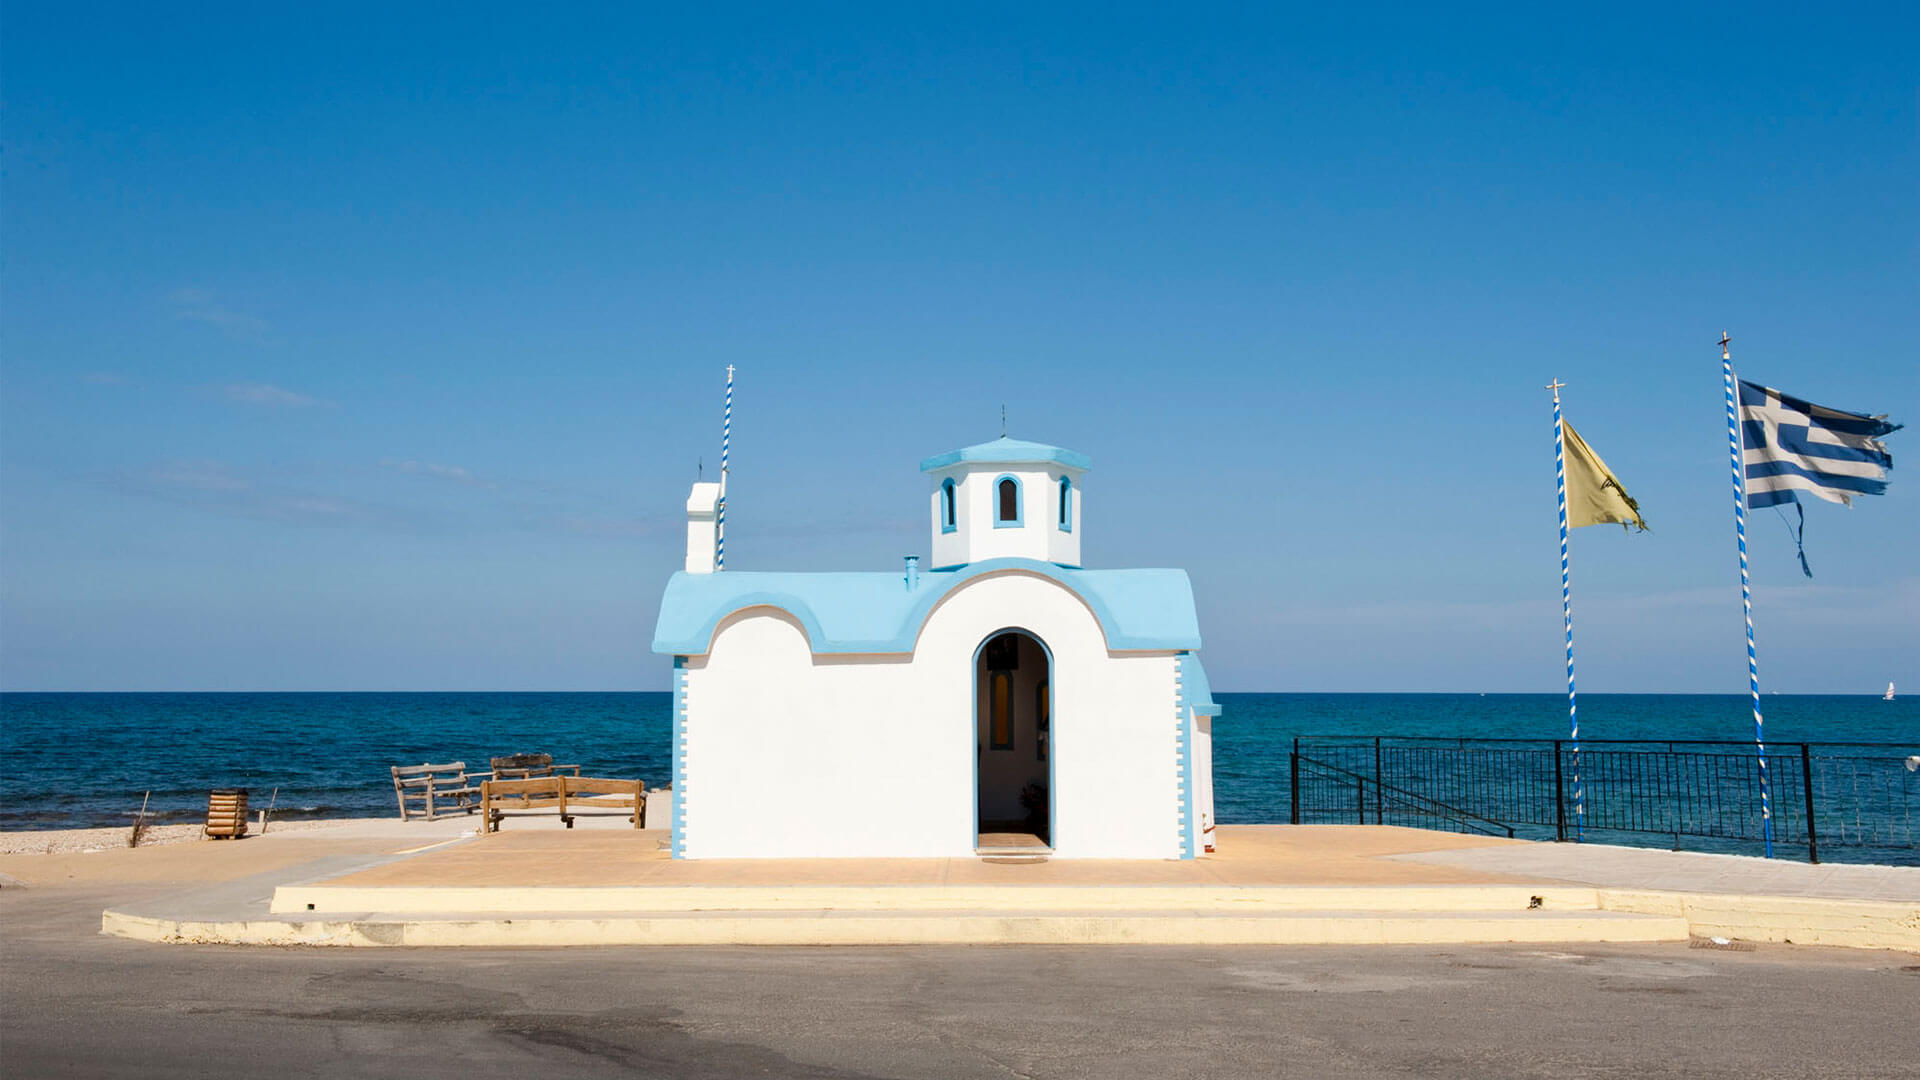 little churce building in greece by the sea